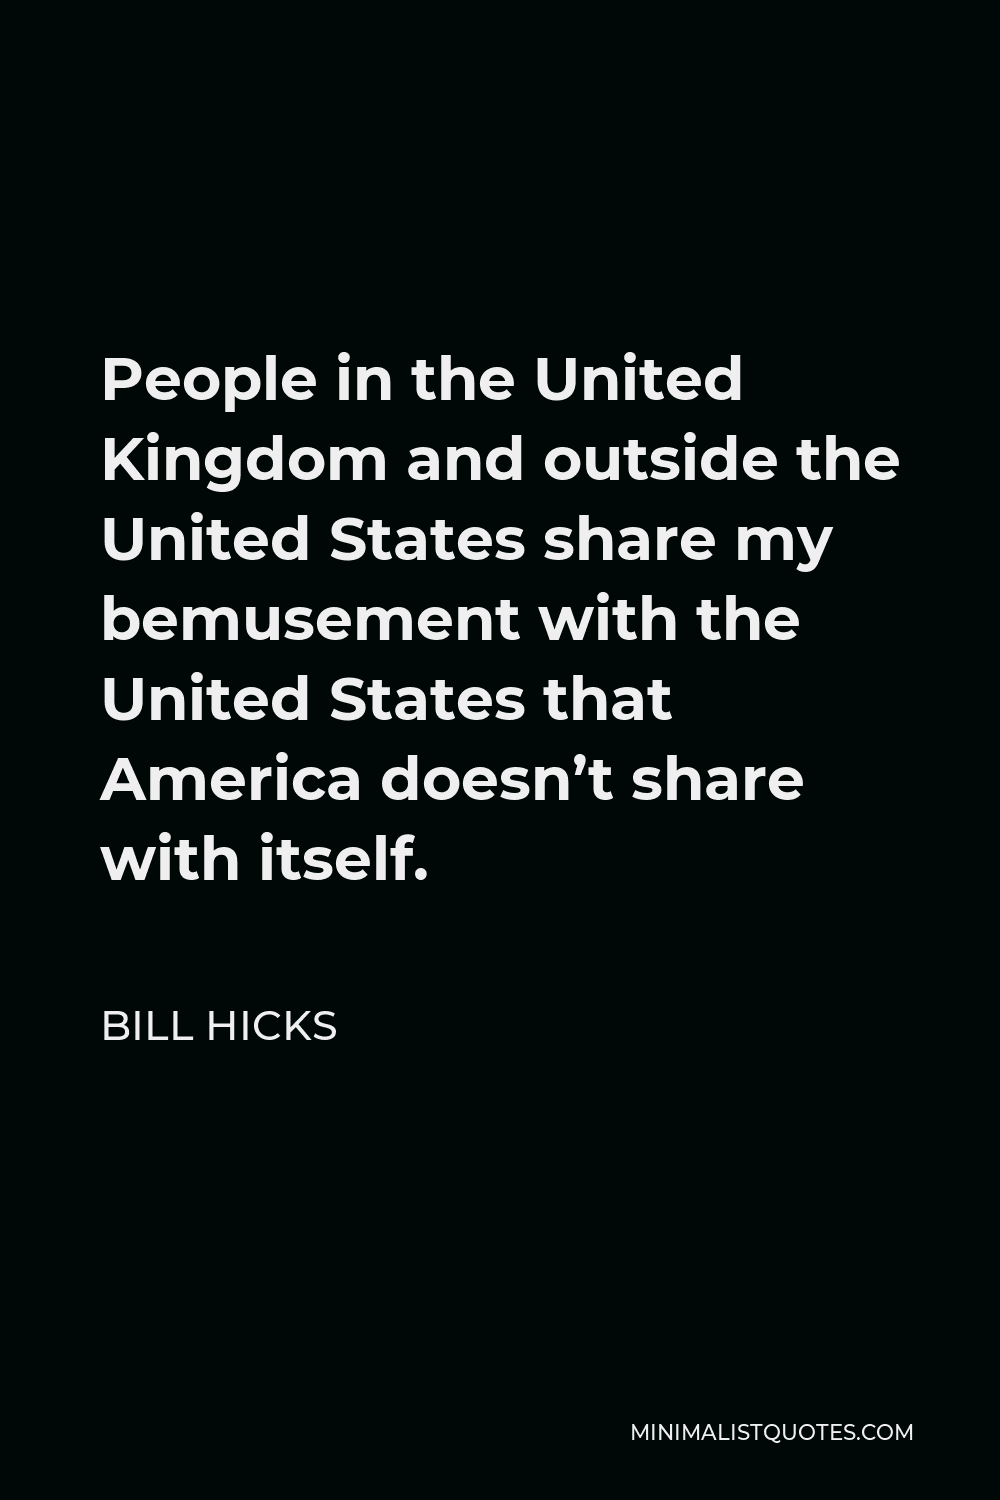 Bill Hicks Quote - People in the United Kingdom and outside the United States share my bemusement with the United States that America doesn’t share with itself.